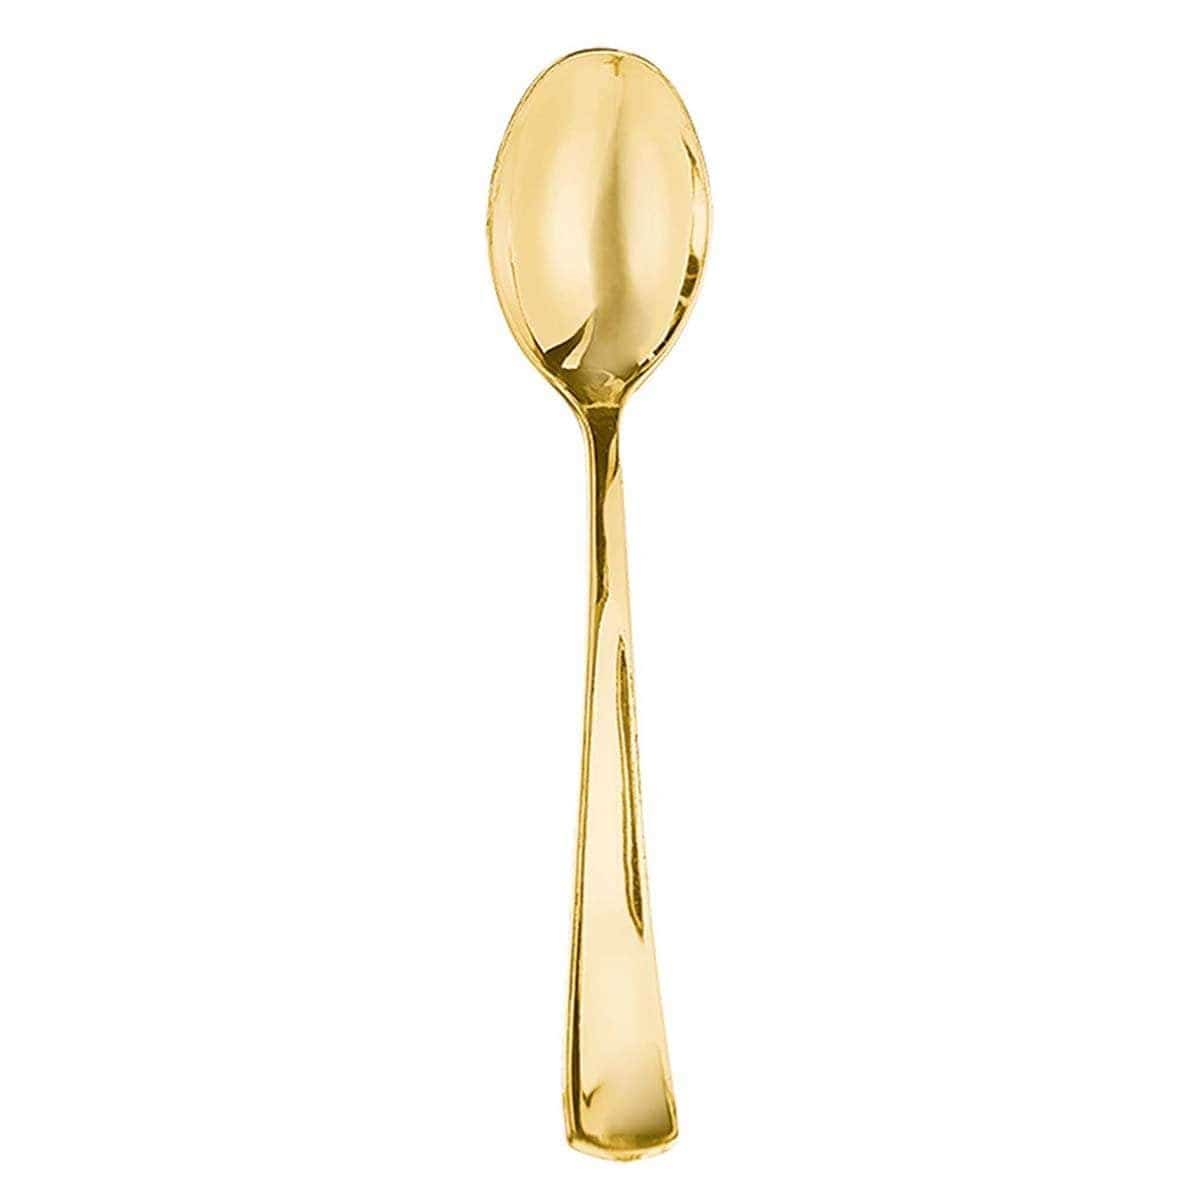 Buy Plasticware Premium Spoons - Gold 32/pkg sold at Party Expert